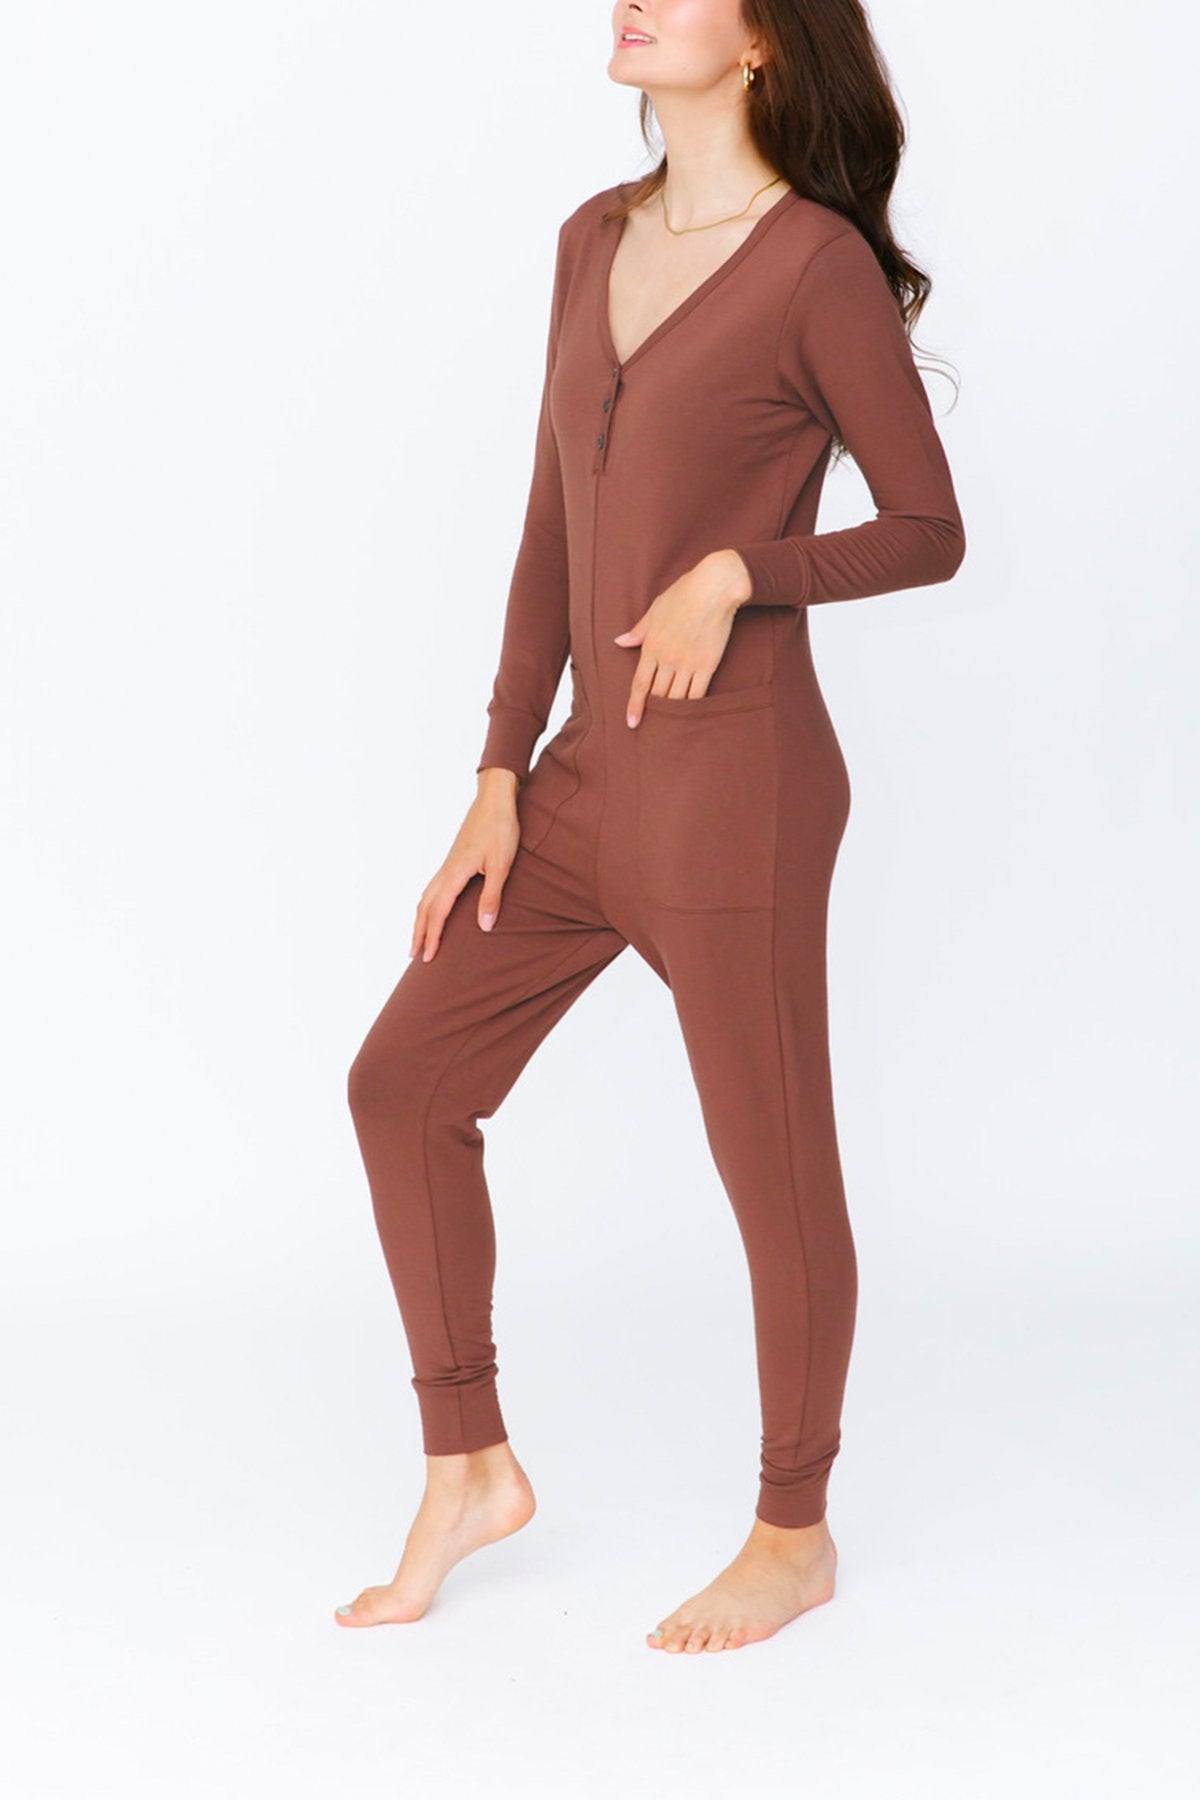 Smash + Tess The Wednesday Romper - Classic Cocoa